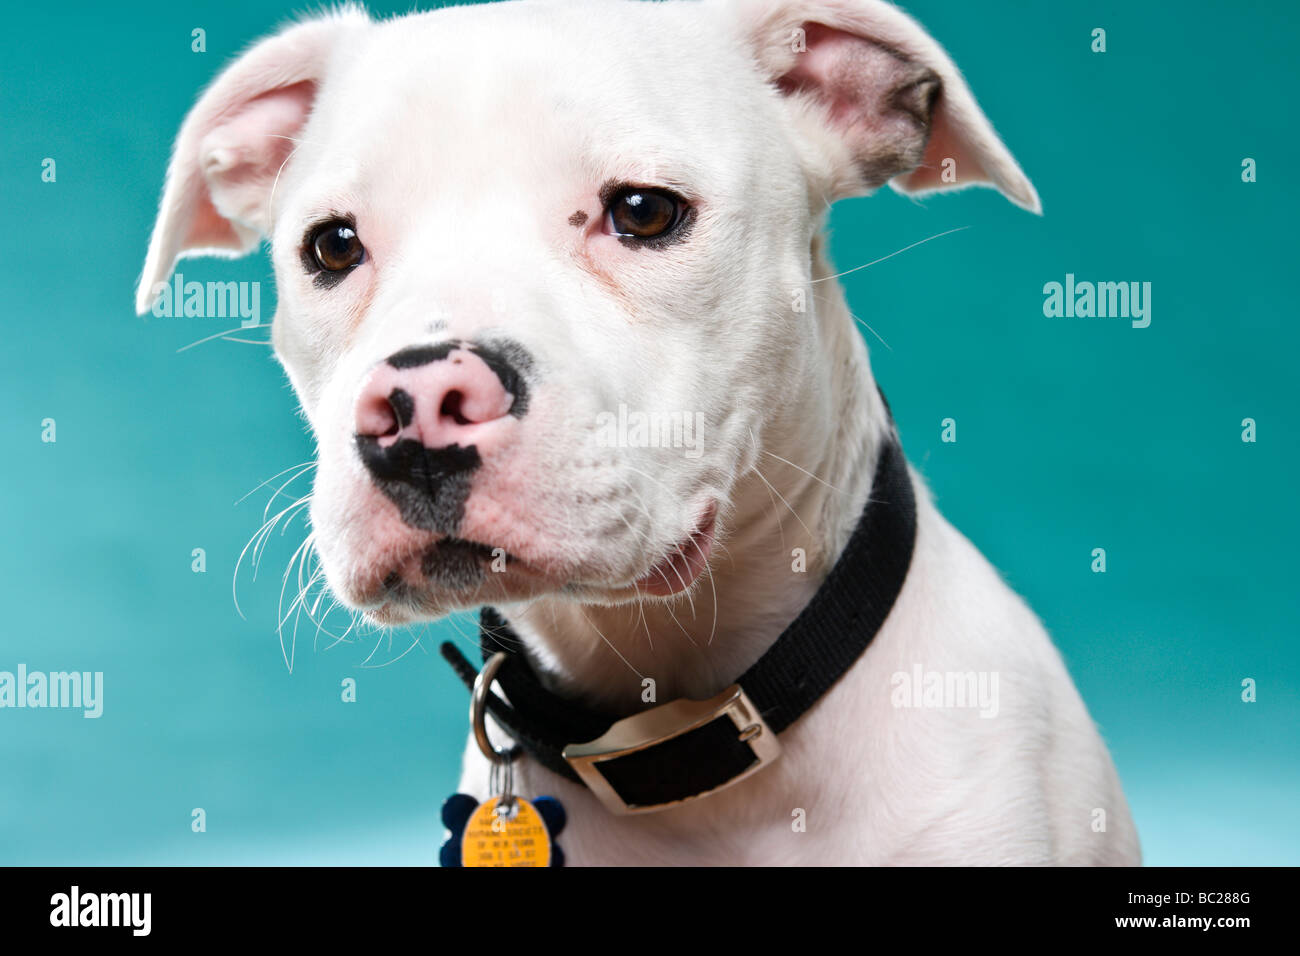 A white Staffordshire Bull Terrier in the studio against a blue green background. Stock Photo